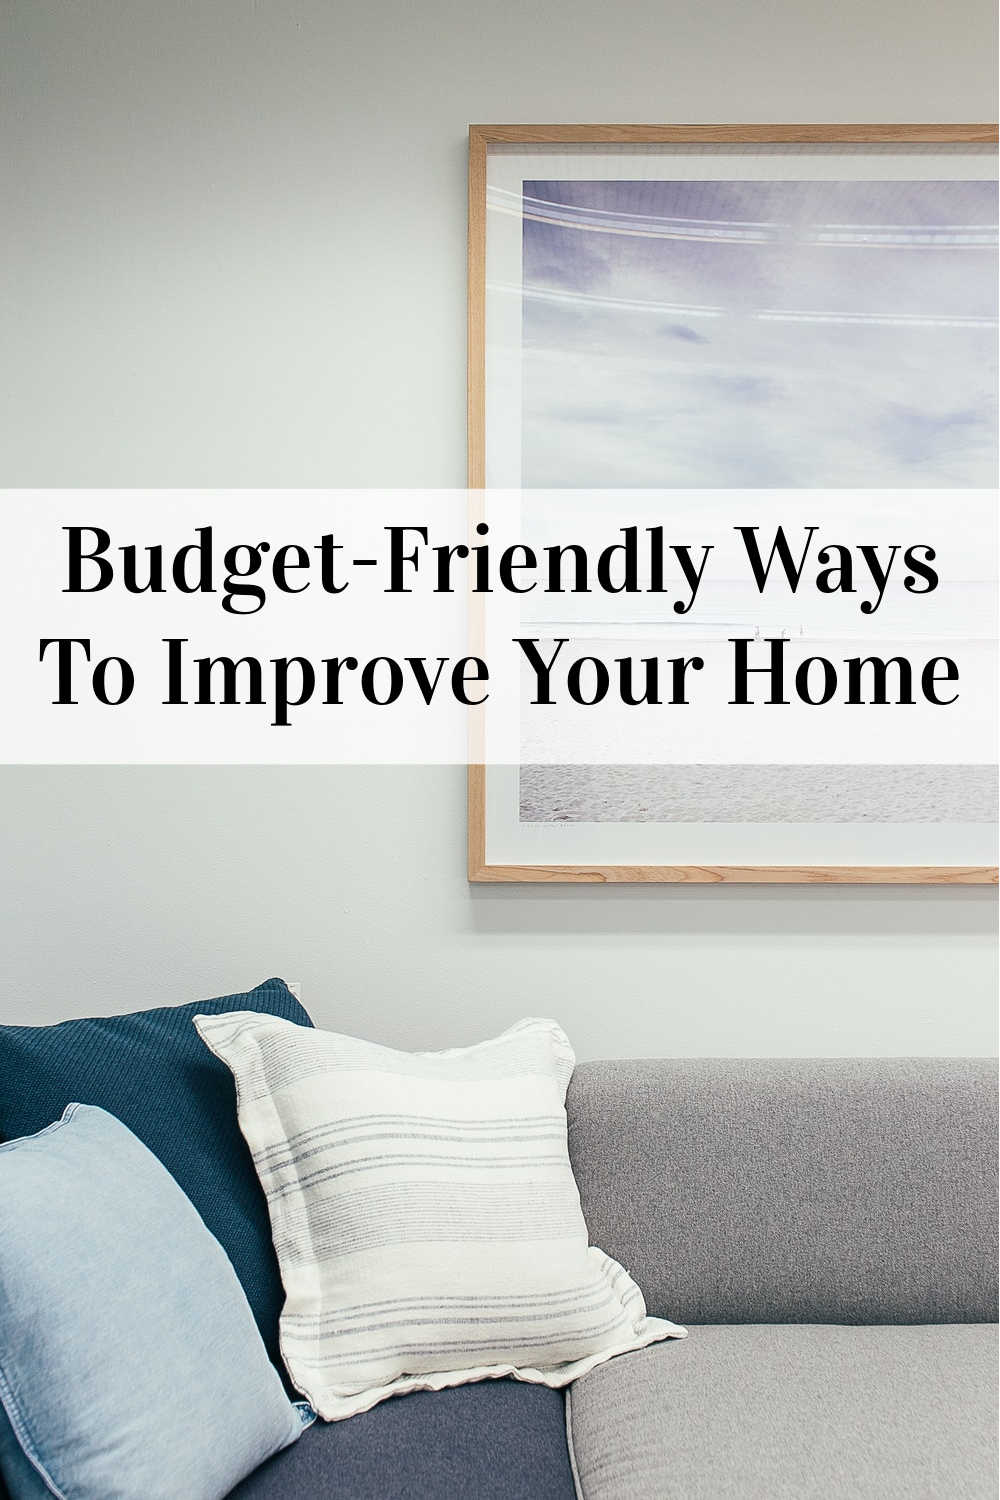 Budget-Friendly Ways To Improve Your Home